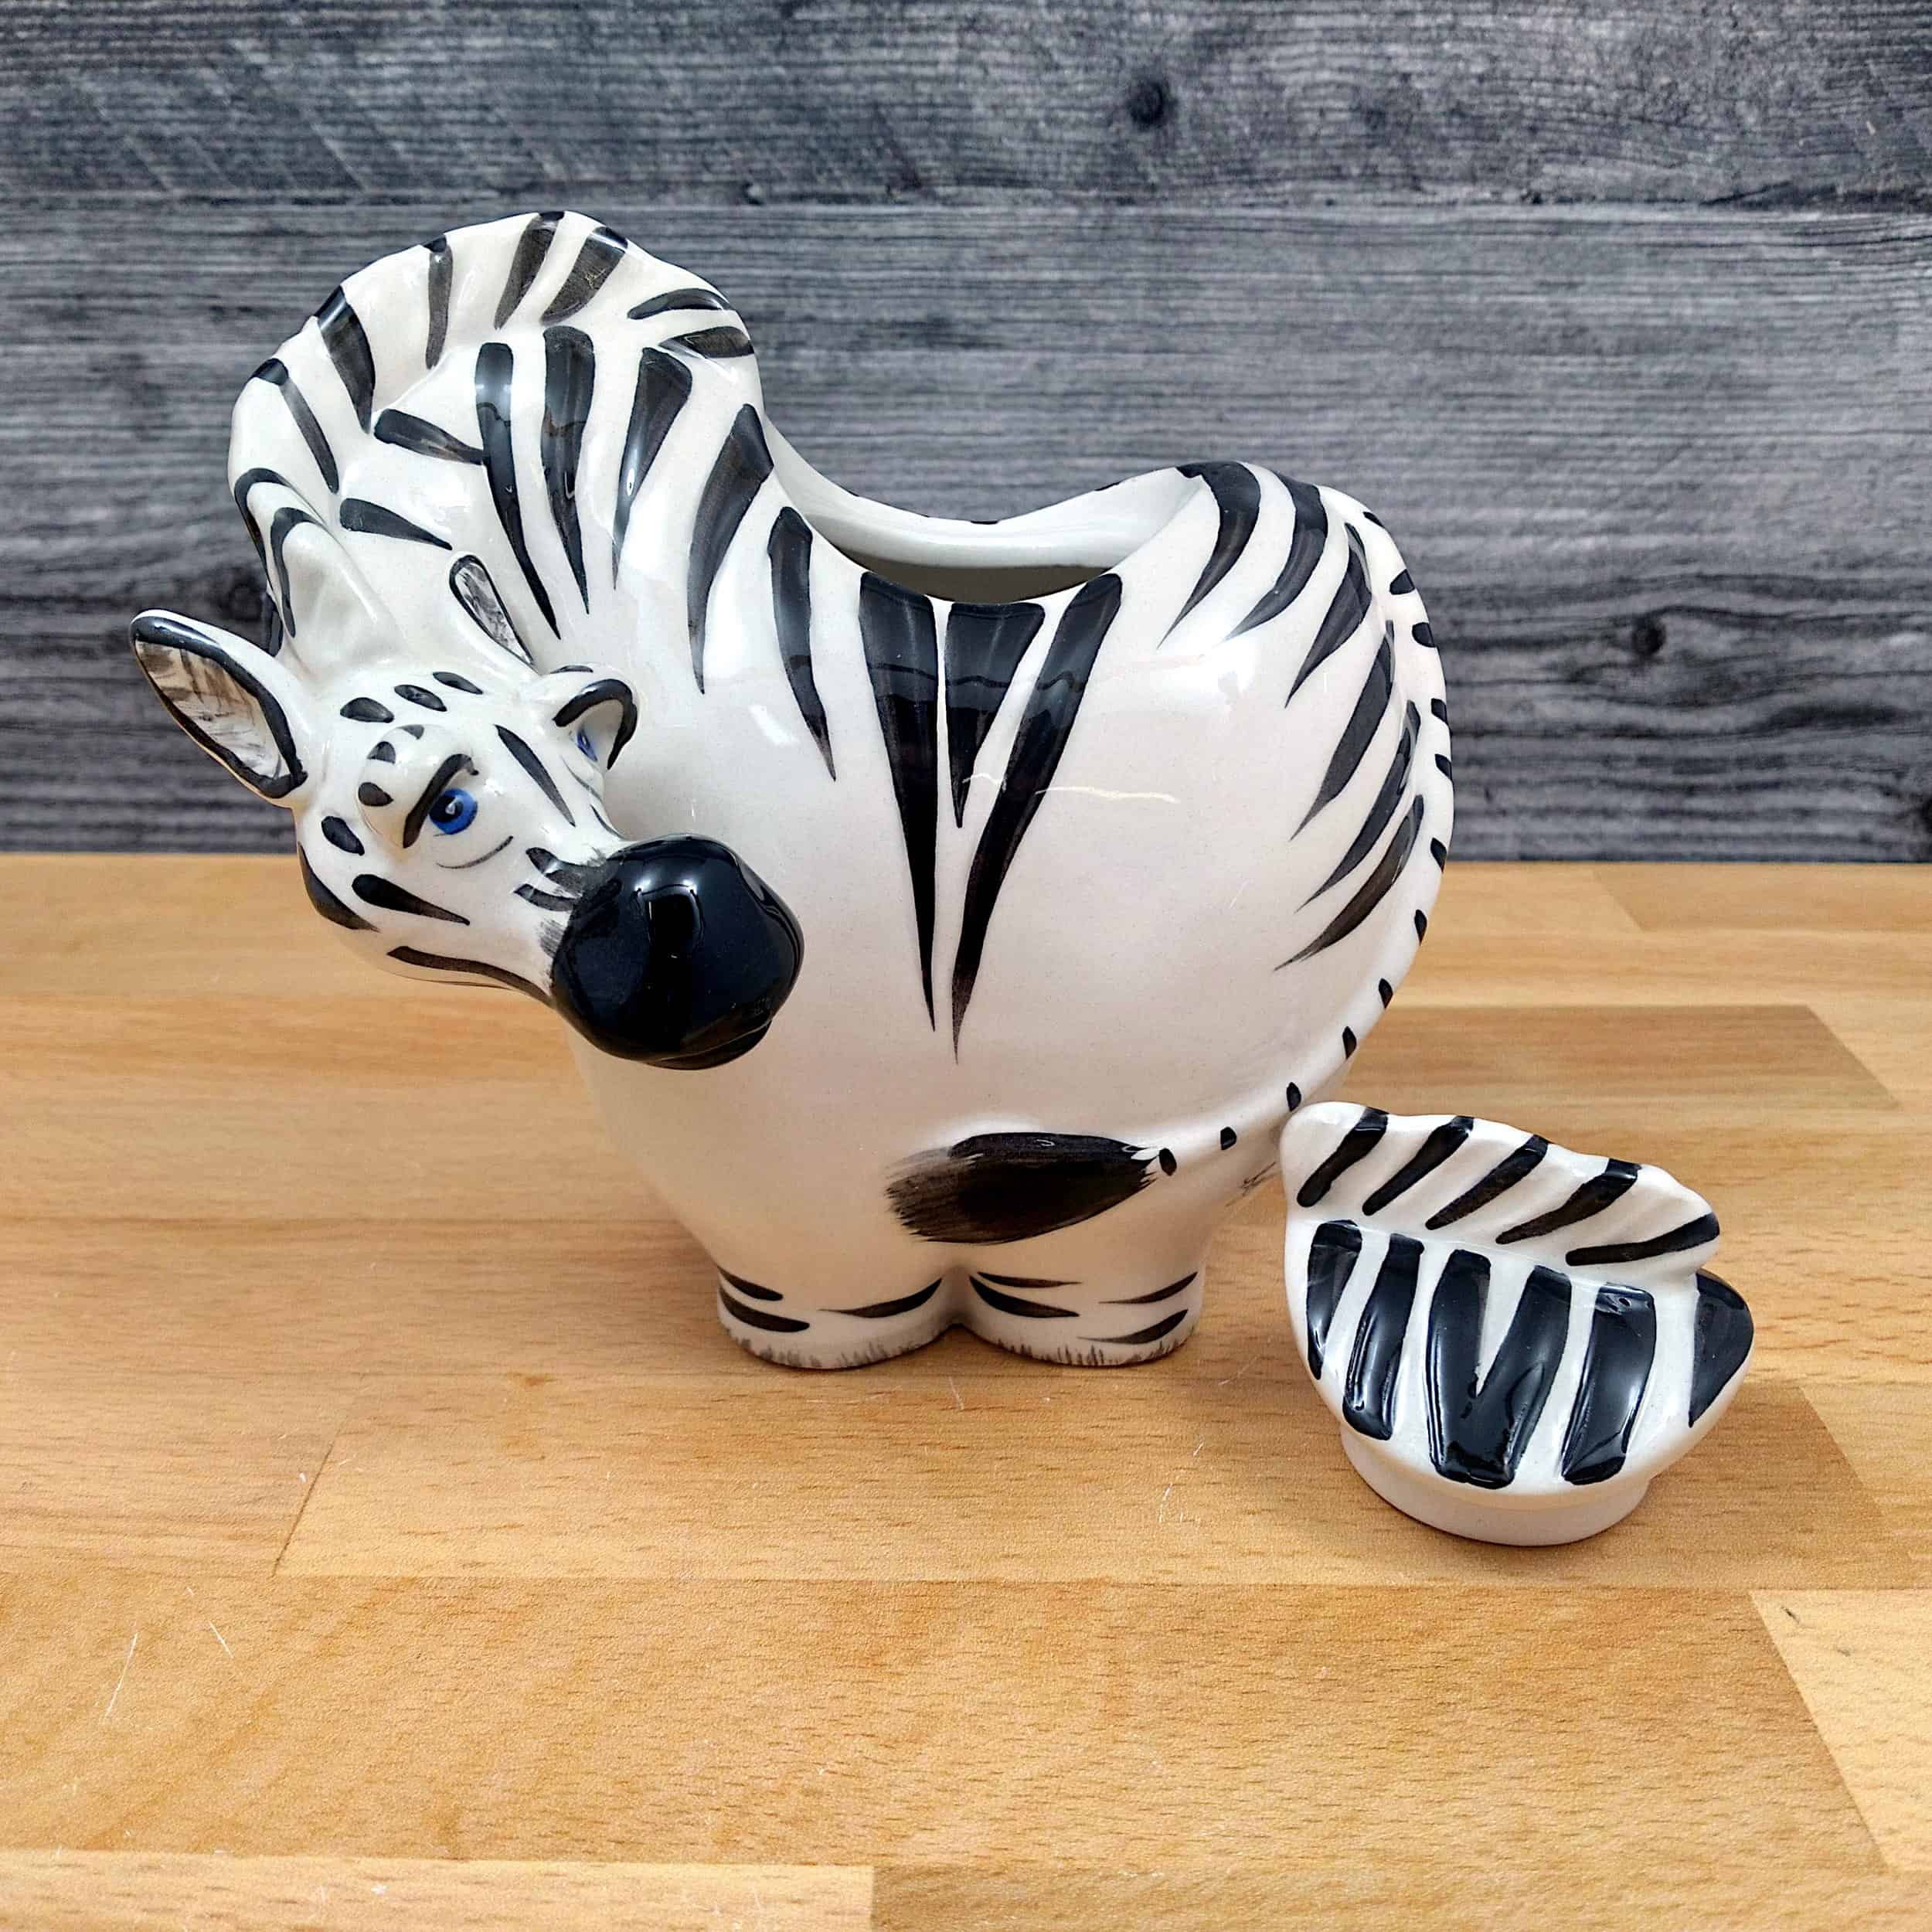 This Zebra Sugar Bowl and Creamer Set Decorative by Blue Sky is made with love by Premier Homegoods! Shop more unique gift ideas today with Spots Initiatives, the best way to support creators.